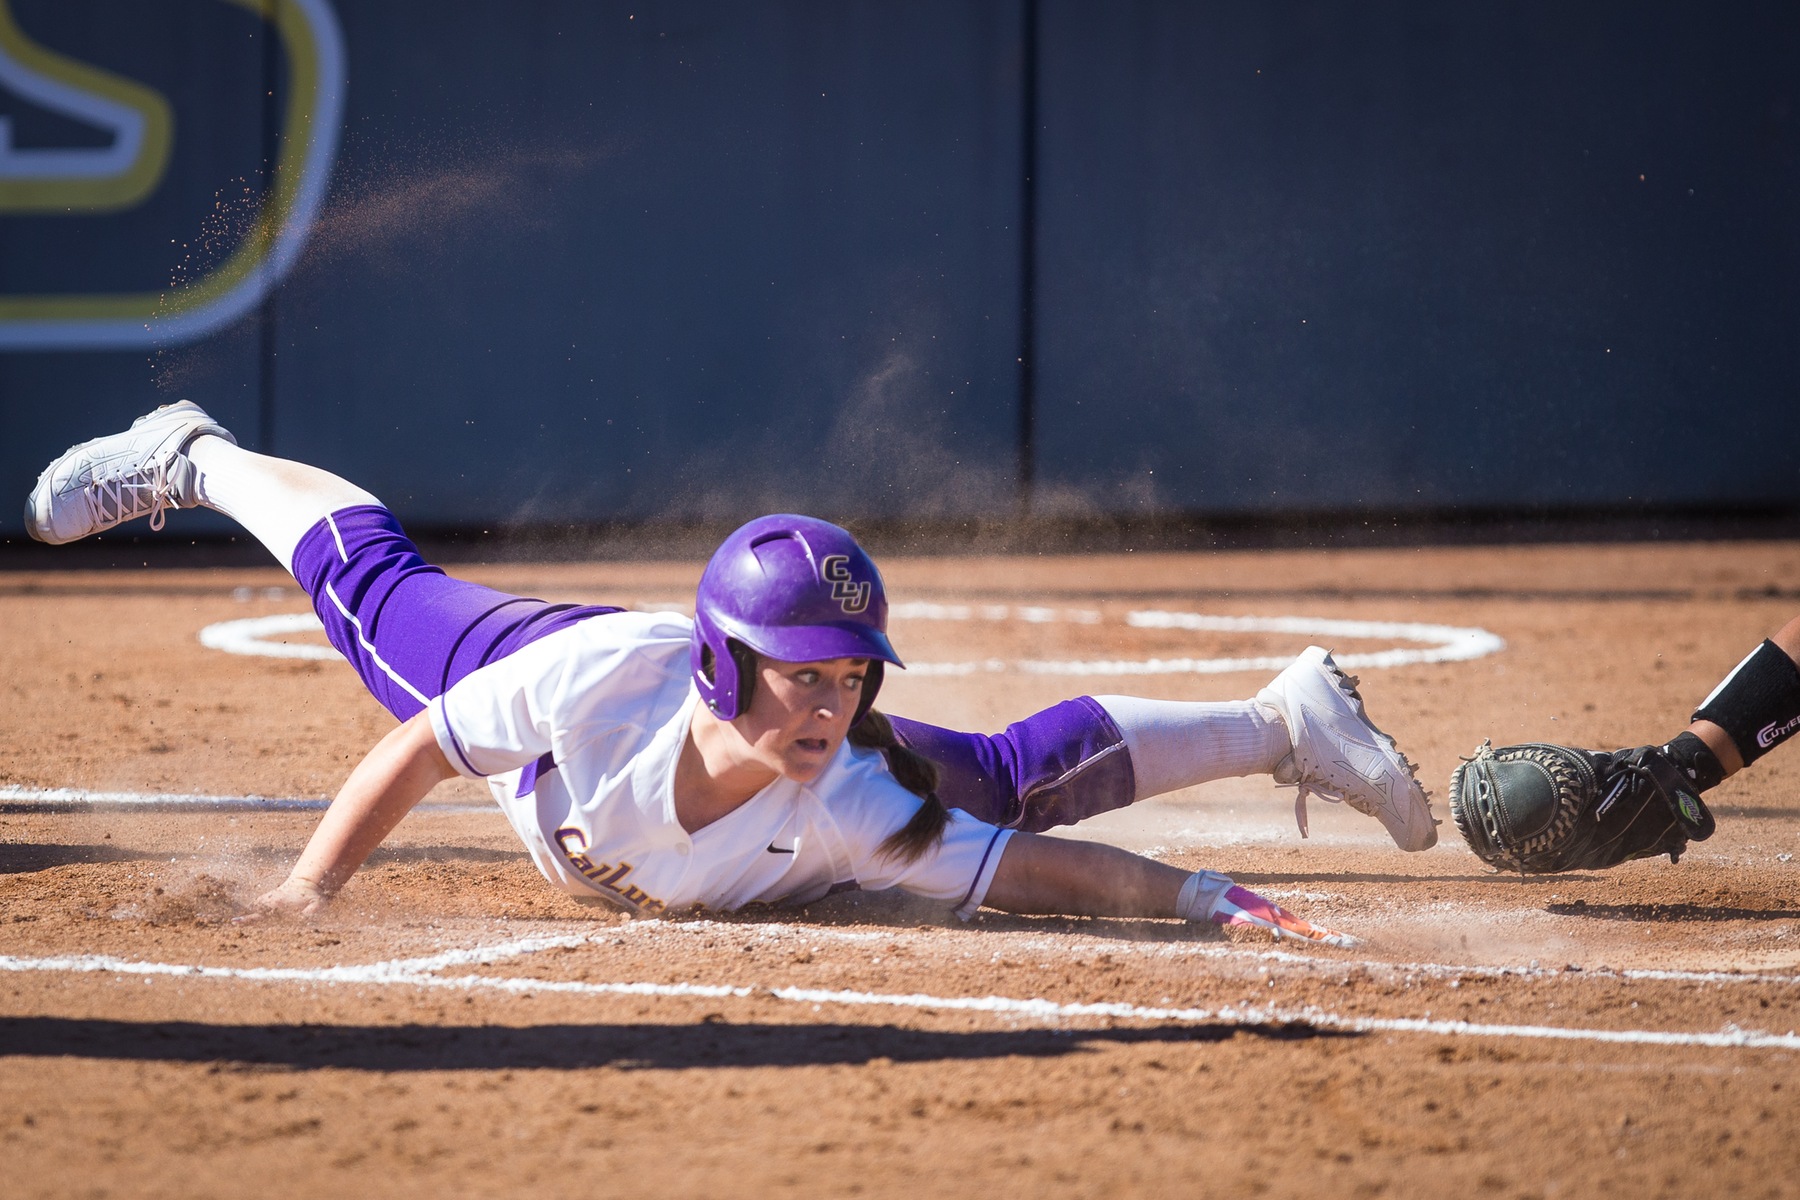 Kendall Marinesi slides into home. Photo by Dave Donovan.